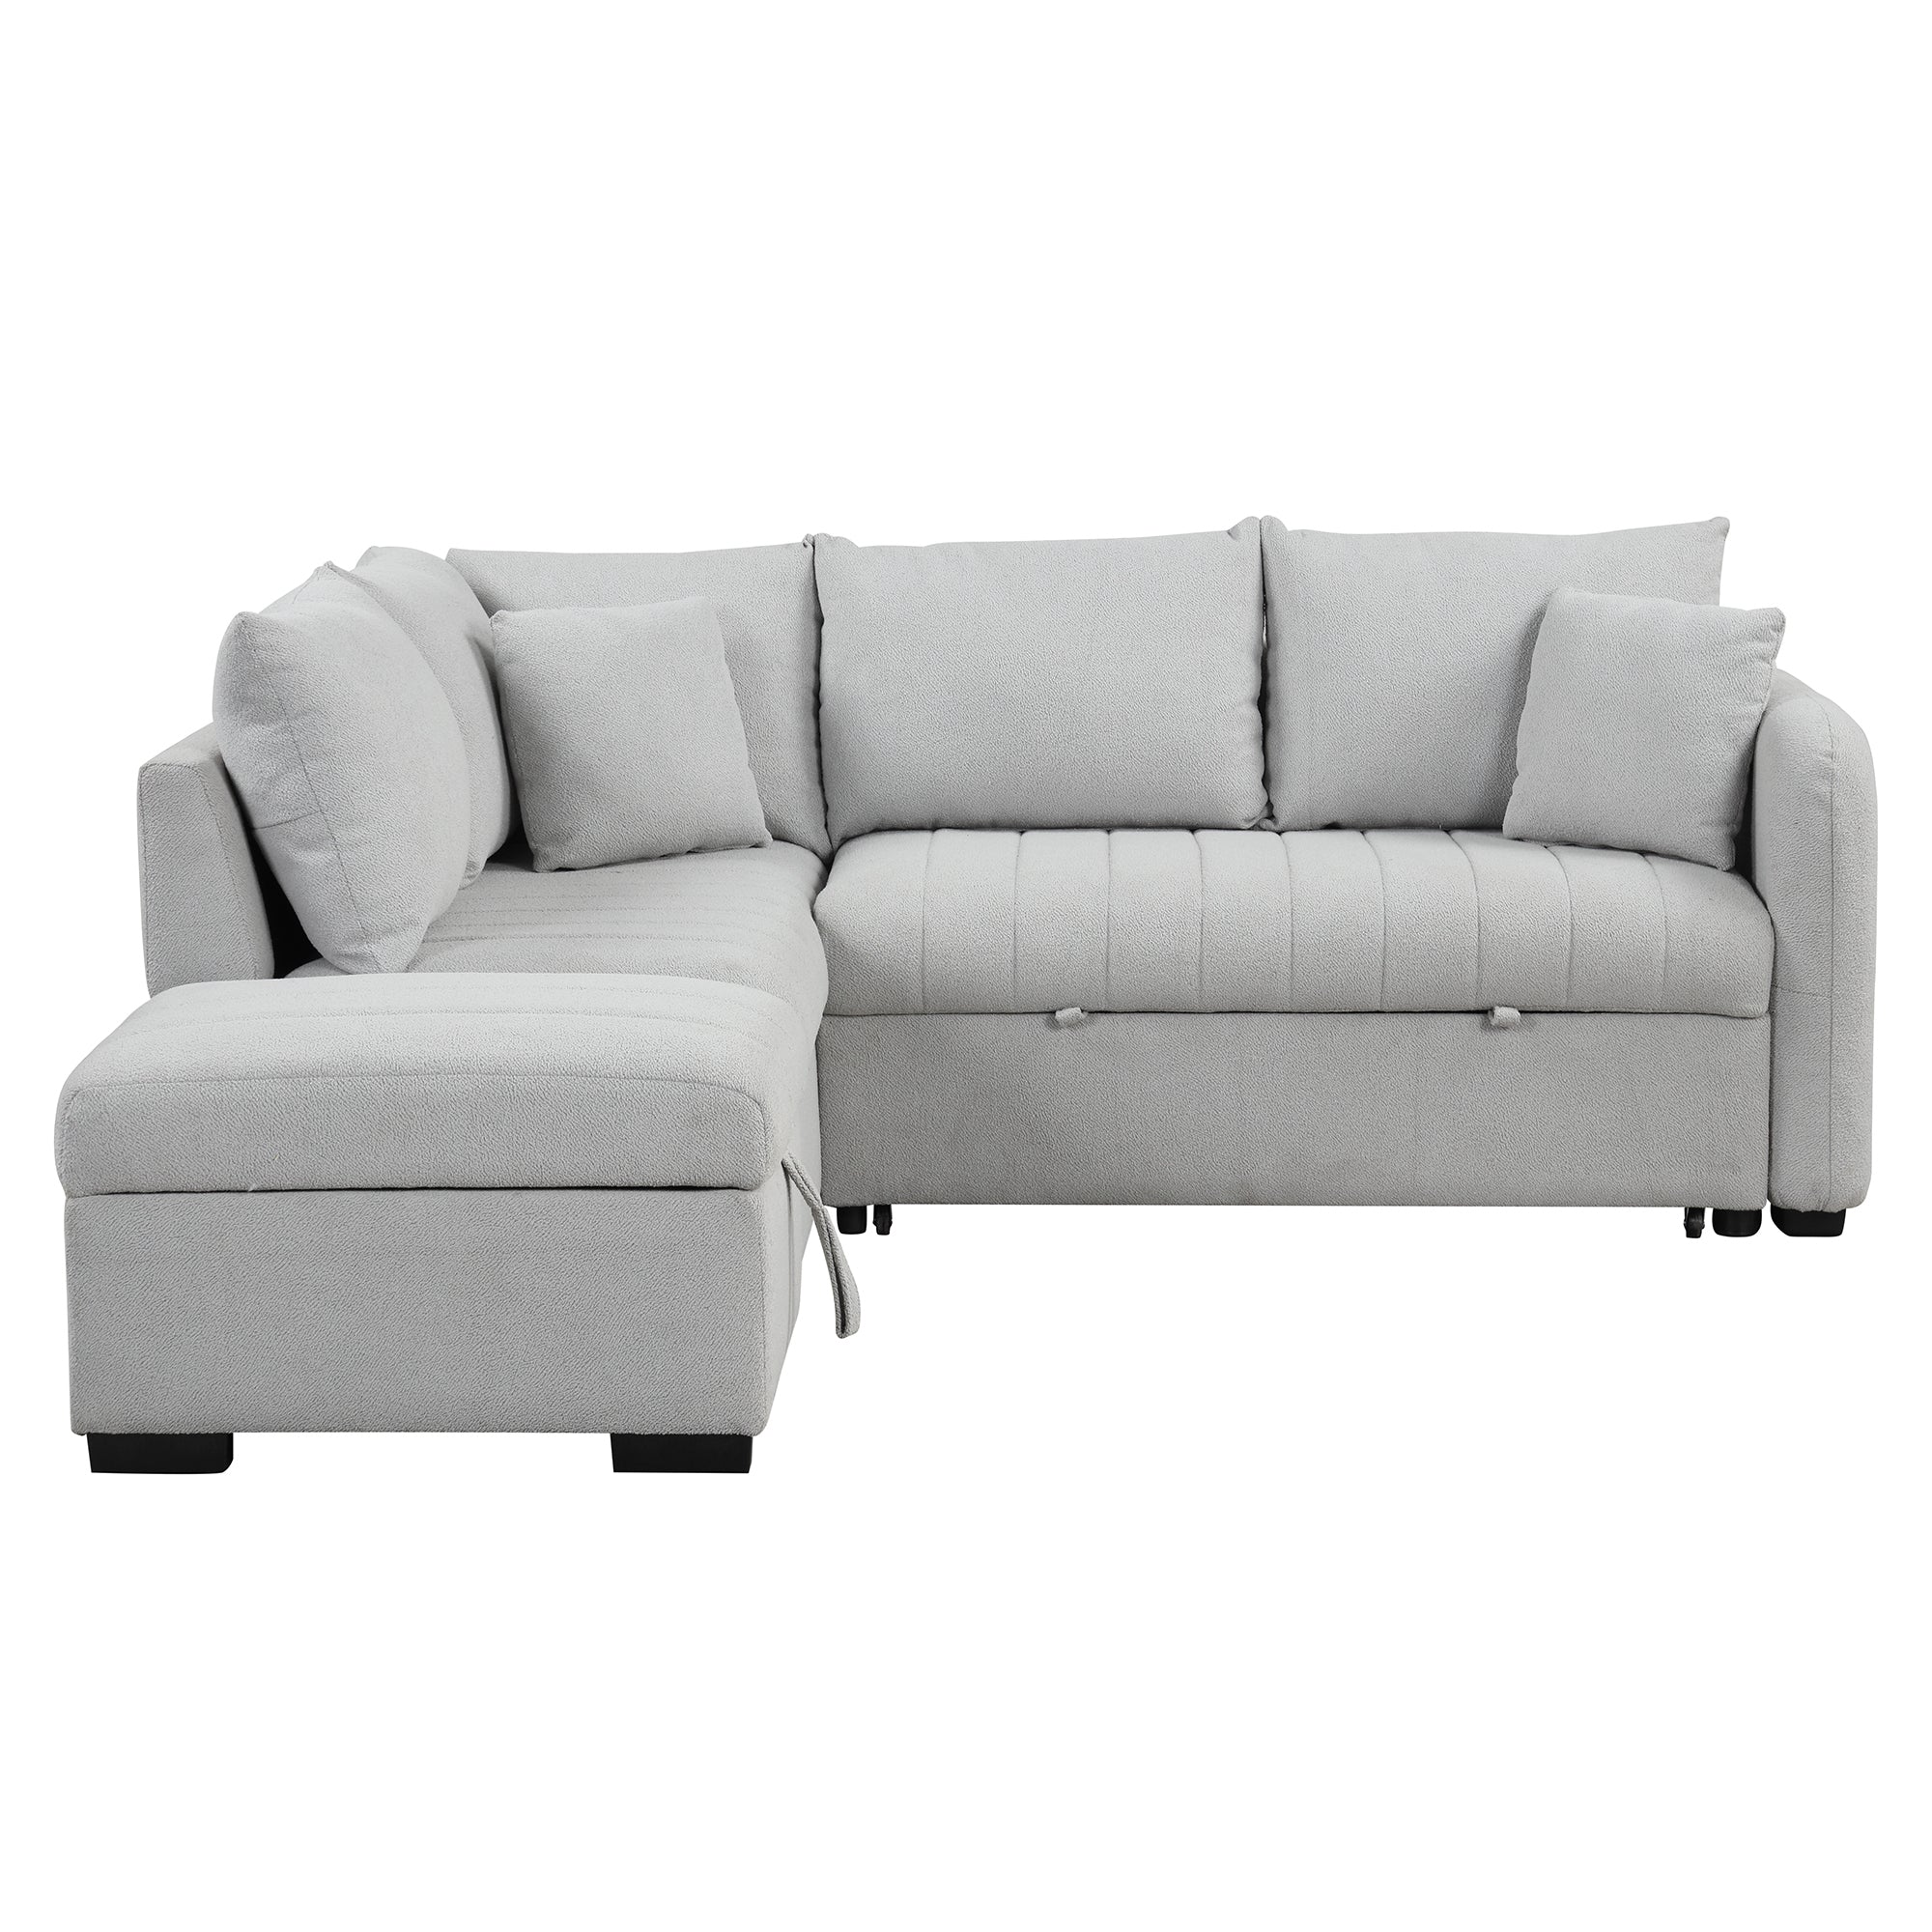 gray l shaped sleeper sectional